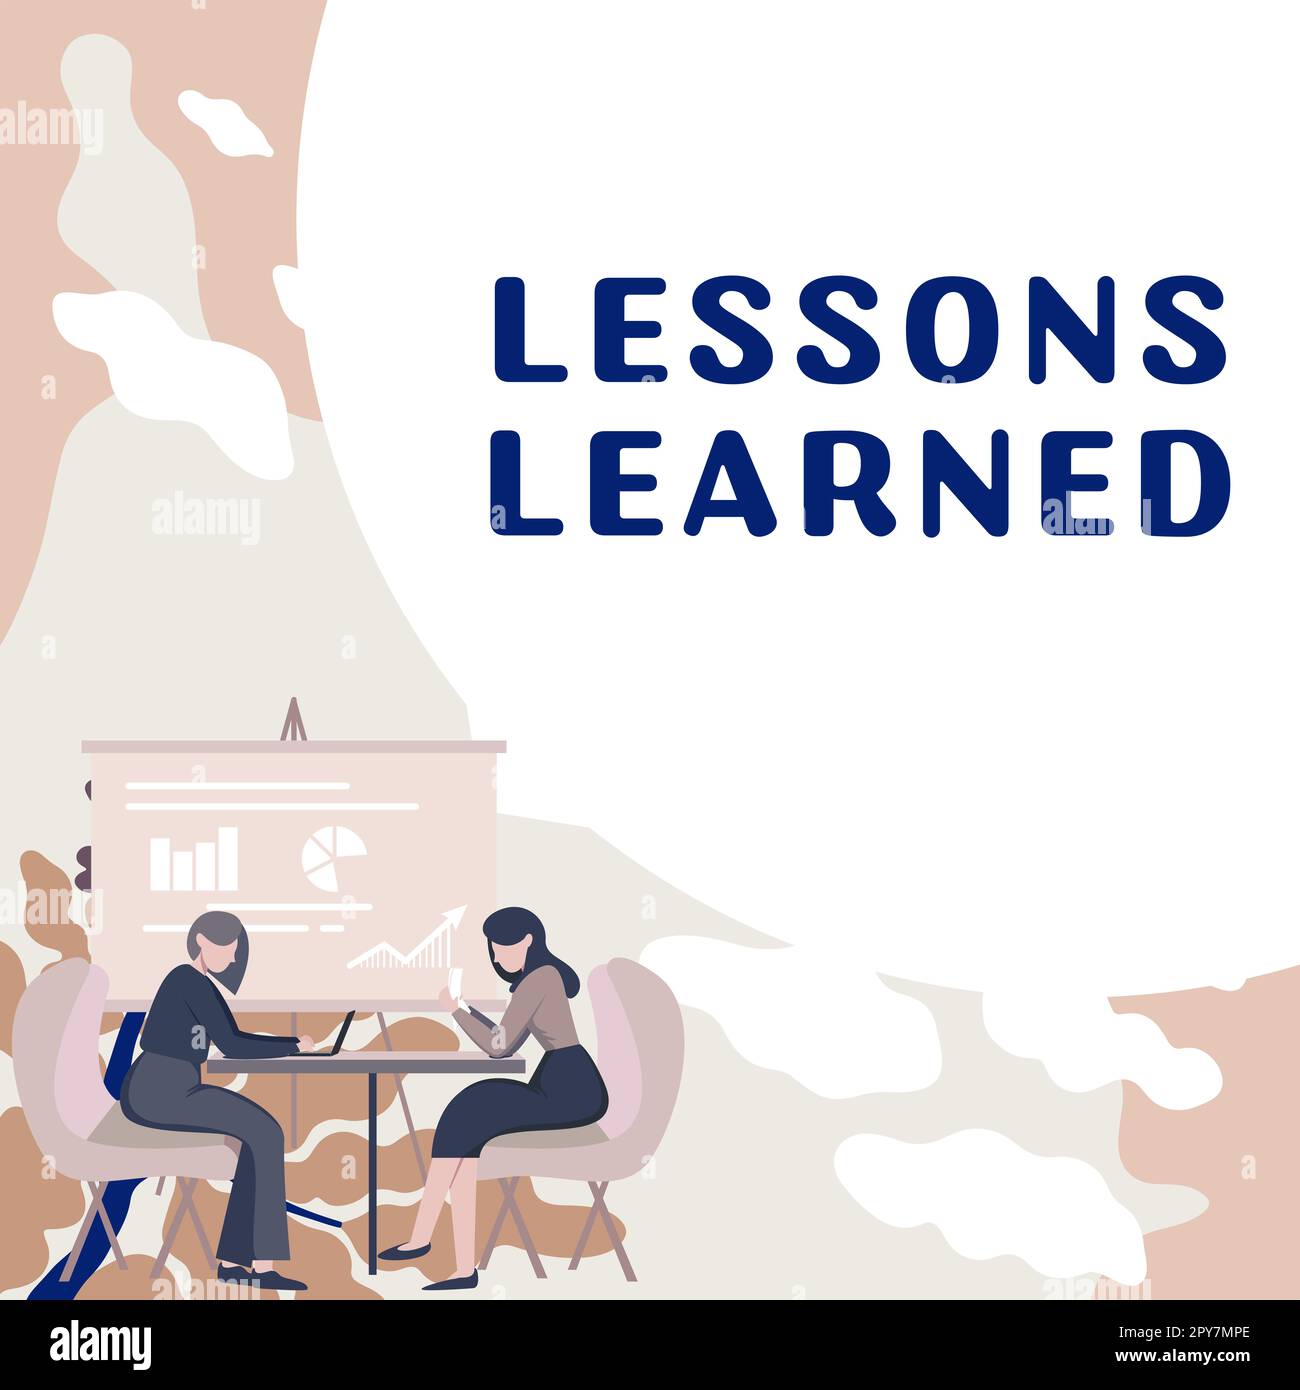 931,060 Lessons Learned Images, Stock Photos, 3D objects